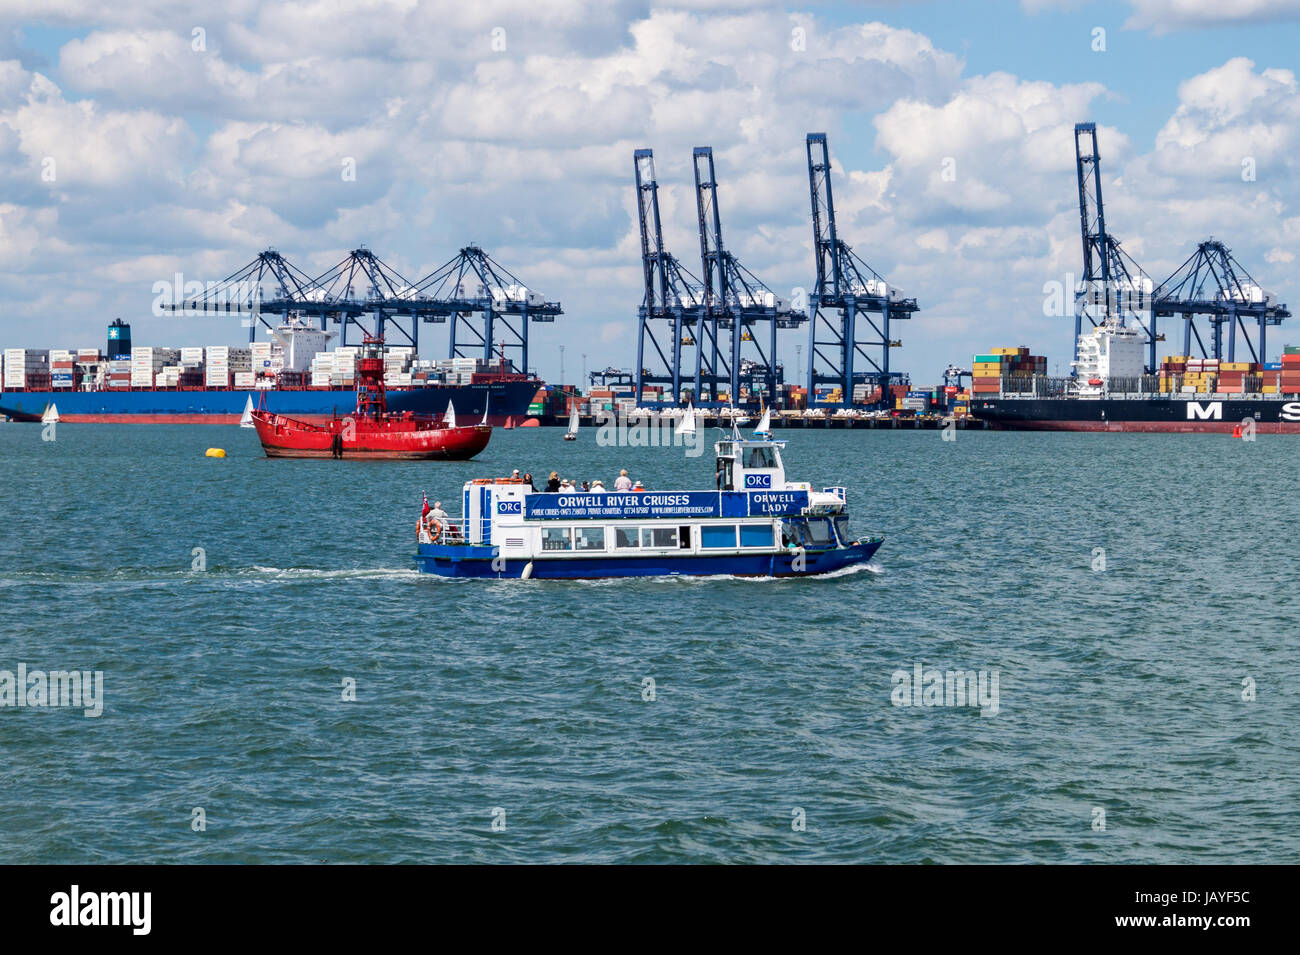 'Orwell Lady' sightseeing cruise boat, and Felixstowe container port, seen from Harwich Essex England Stock Photo